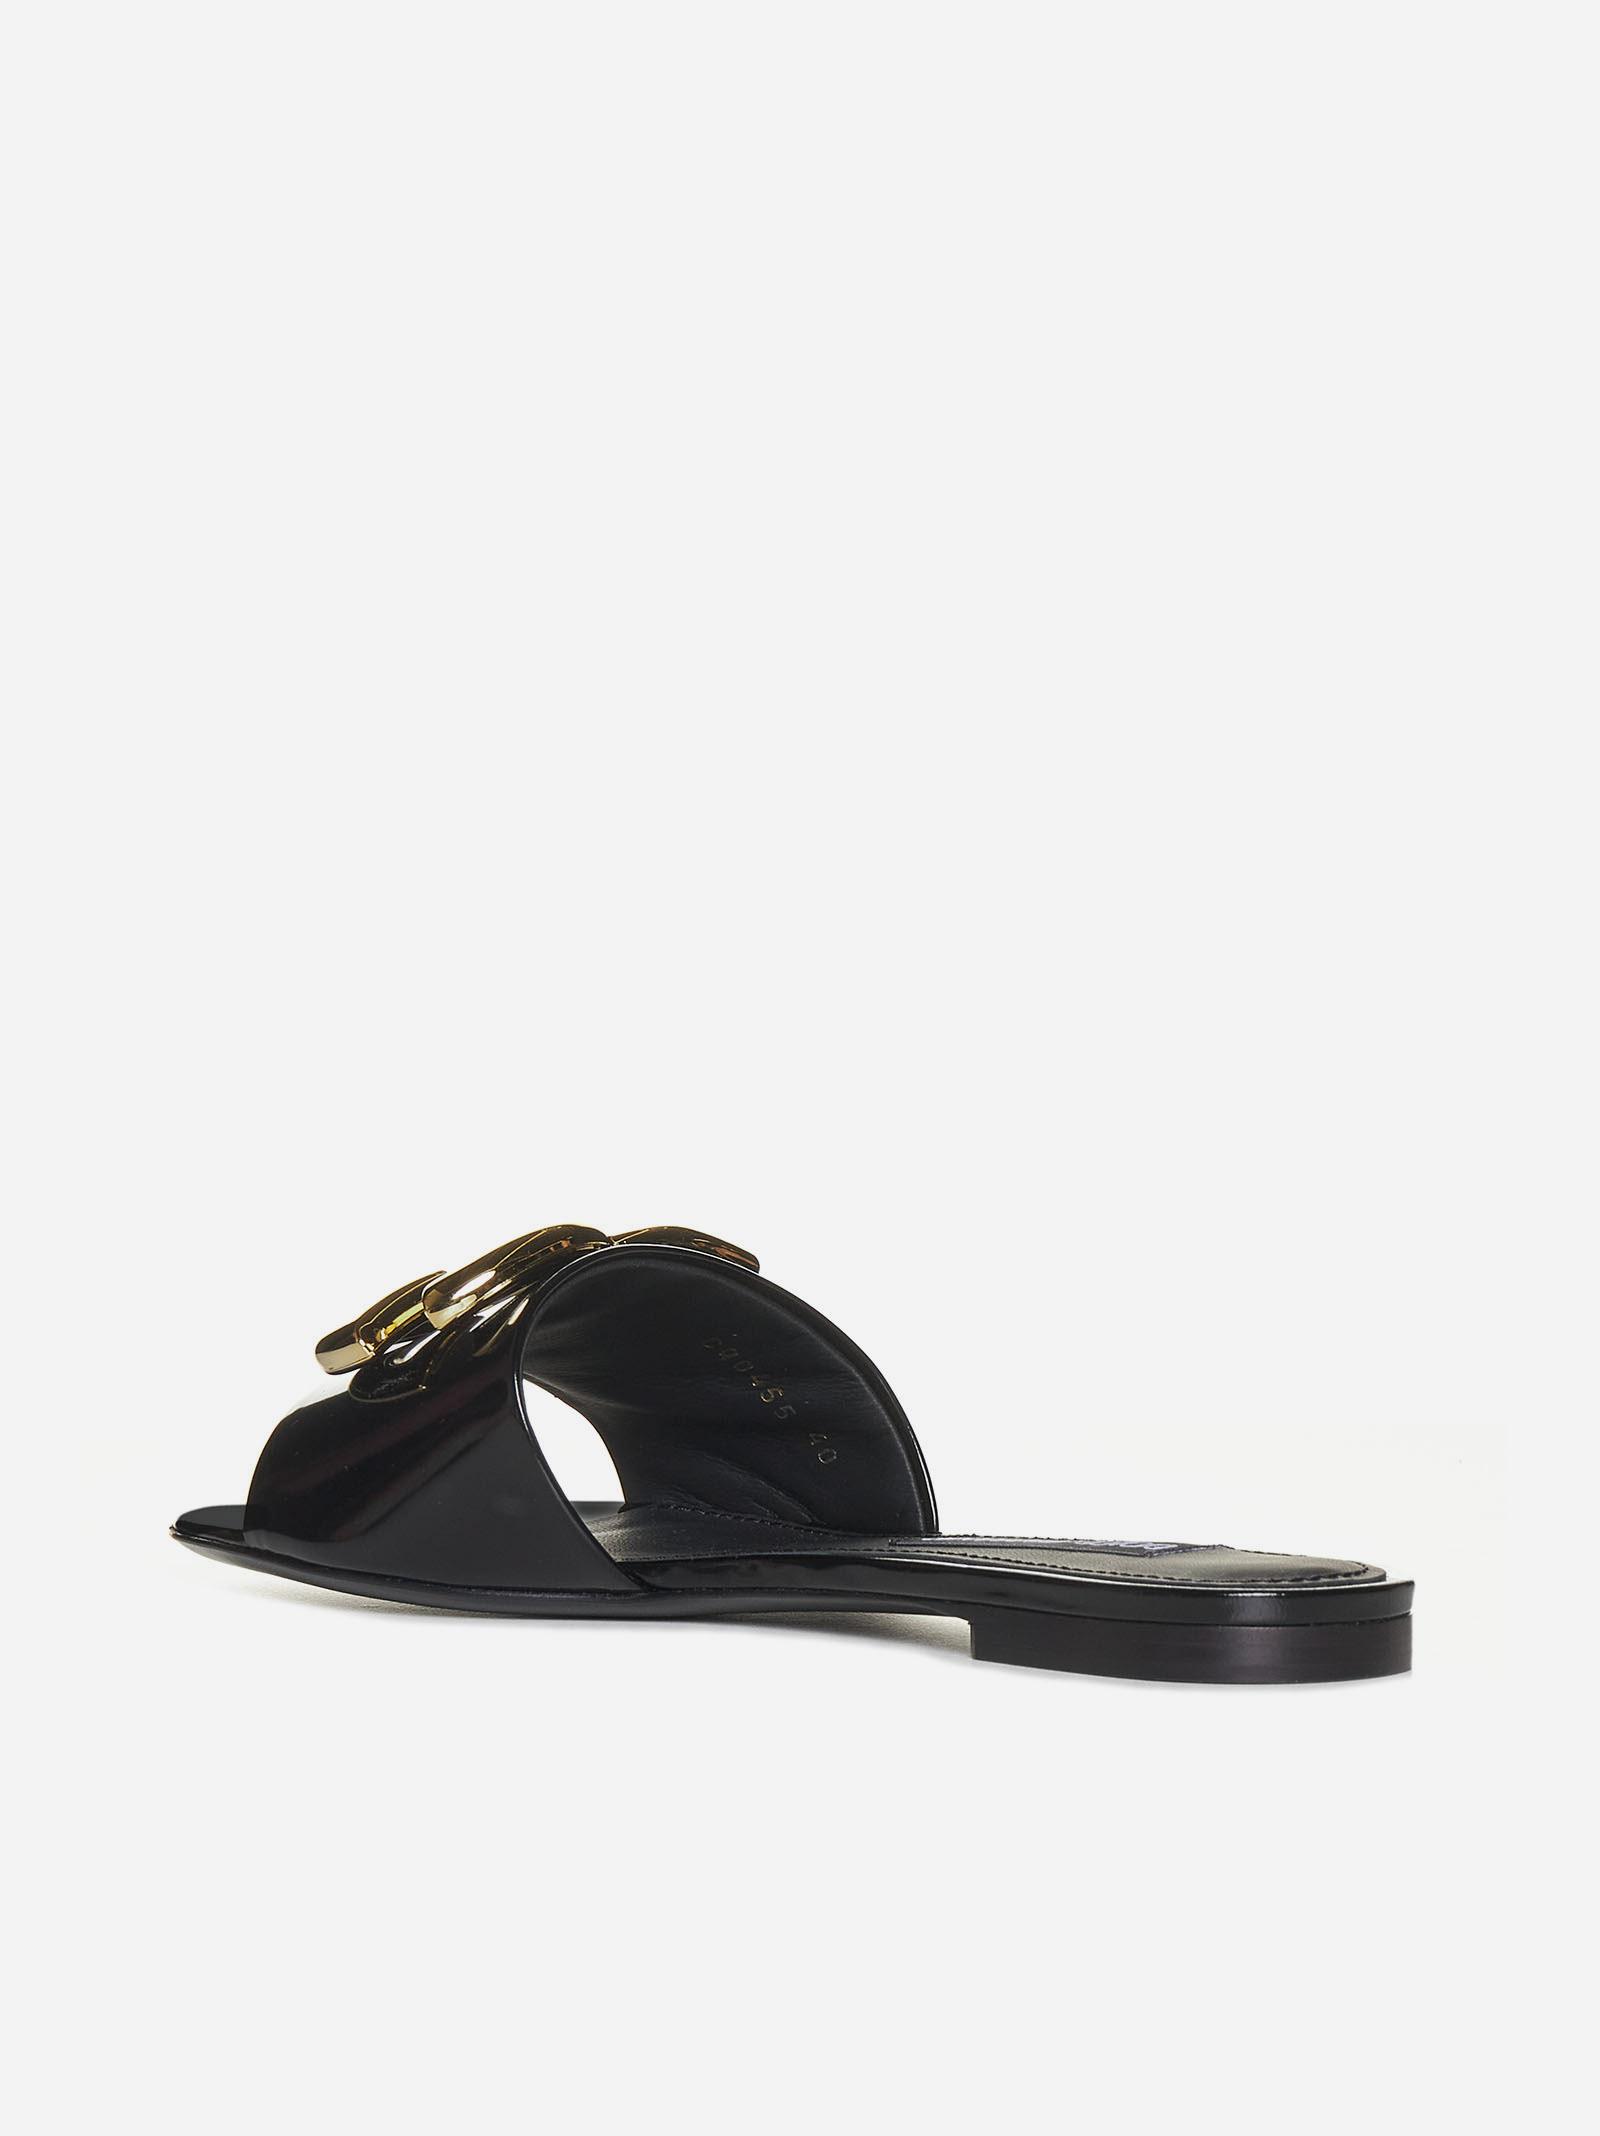 Dolce & Gabbana Dg Logo Patent Leather Flat Sandals in White | Lyst